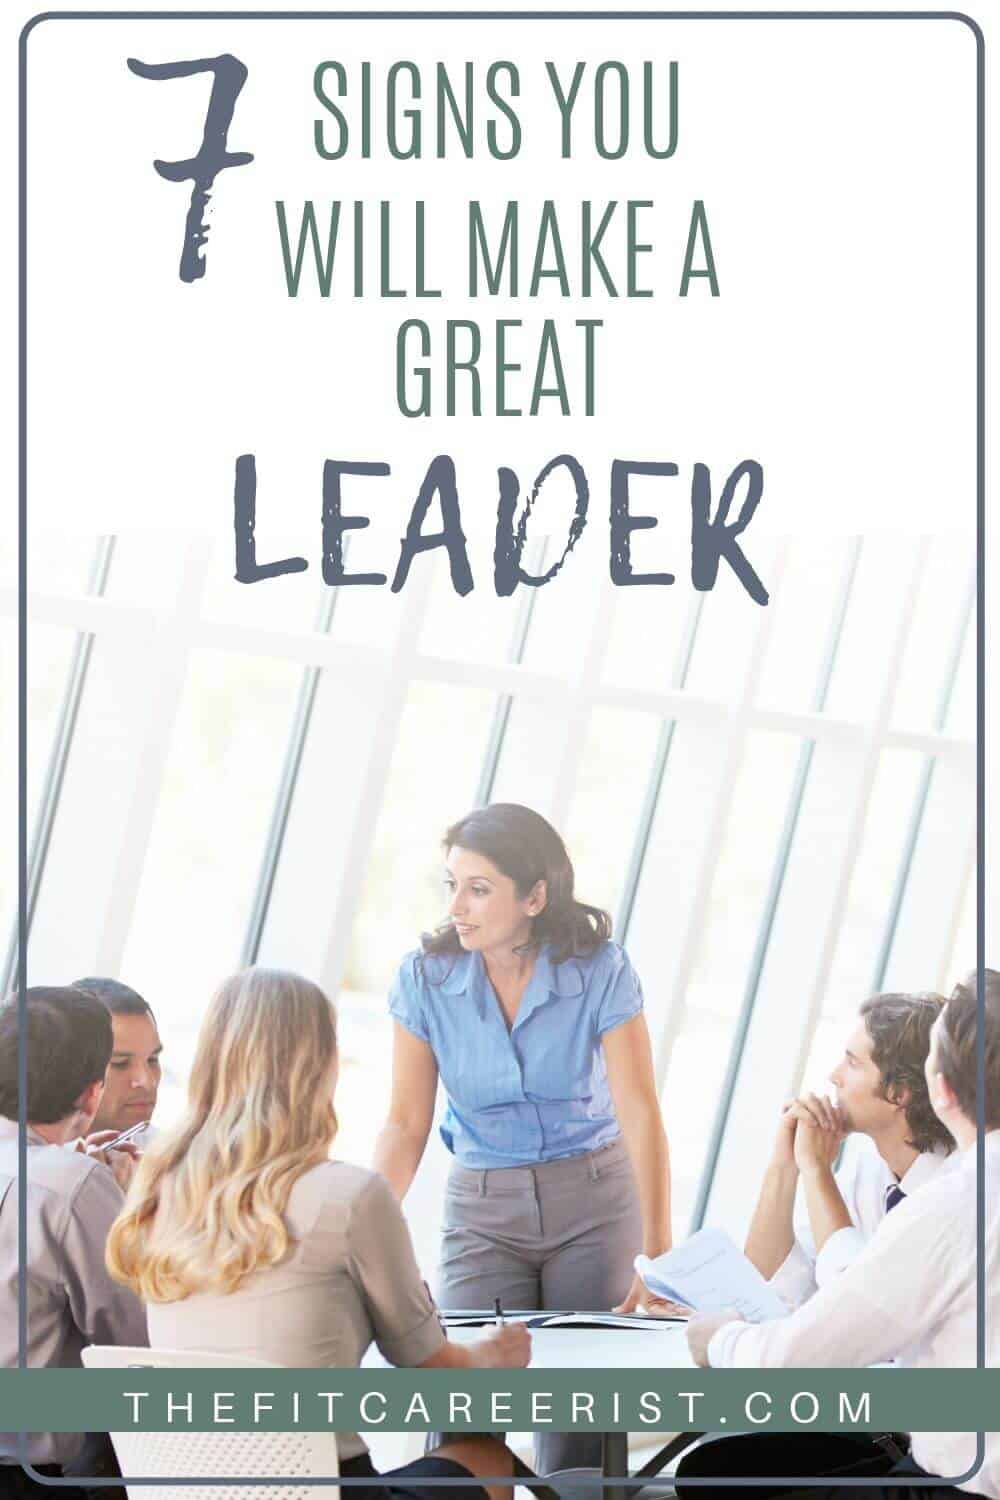 Are you destined for leadership? You might worry you don't have the skills or experience to be a manager or team lead, but there are subtle signs that you're better suited for the role than you think! Do you show any of these 7 subtle signs of leadership?